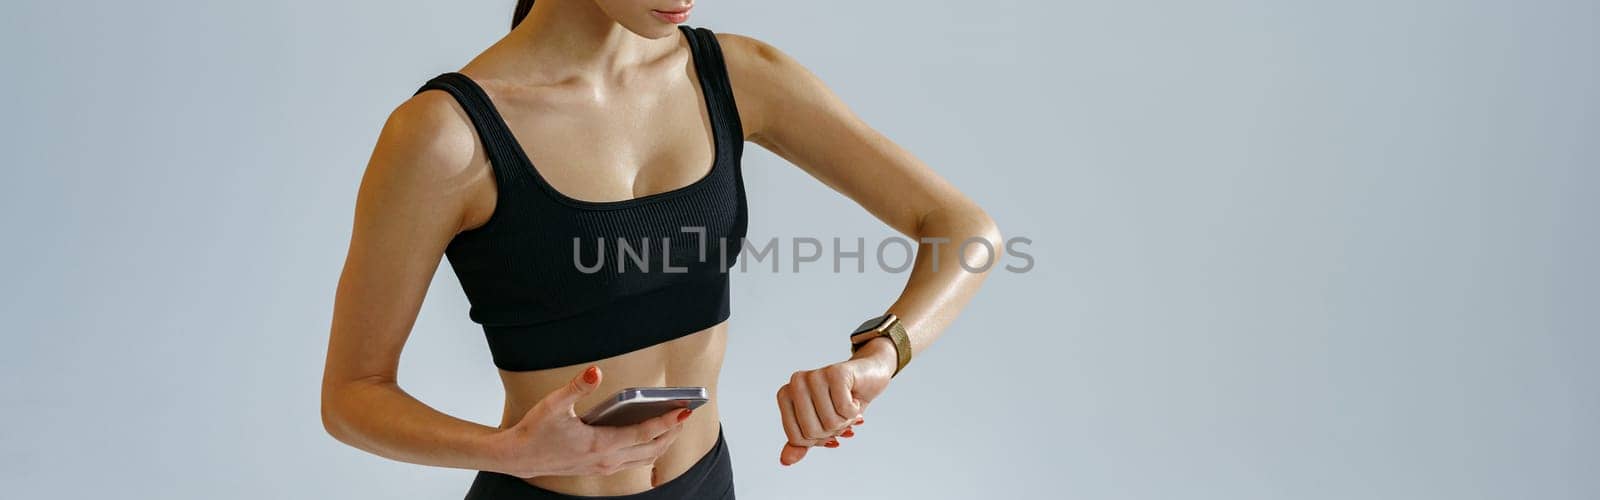 Athletic woman checking her smartwatch after training over studio background. High quality photo